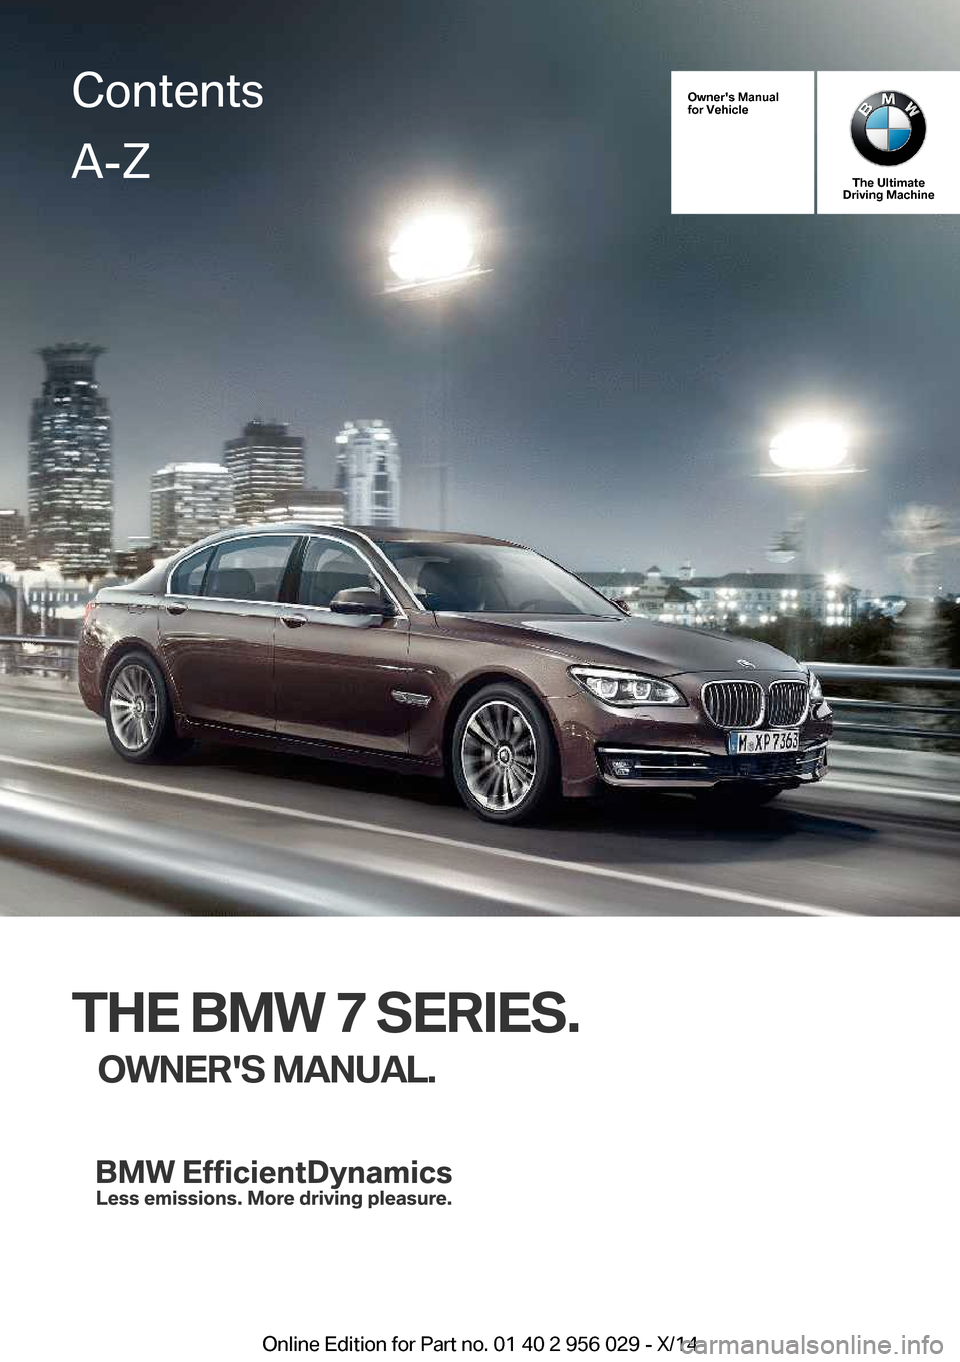 BMW 7 SERIES 2014 F01 Owners Manual Owners Manual
for Vehicle
The Ultimate
Driving Machine
THE BMW 7 SERIES.
OWNERS MANUAL.
ContentsA-Z
Online Edition for Part no. 01 40 2 956 029 - X/14   